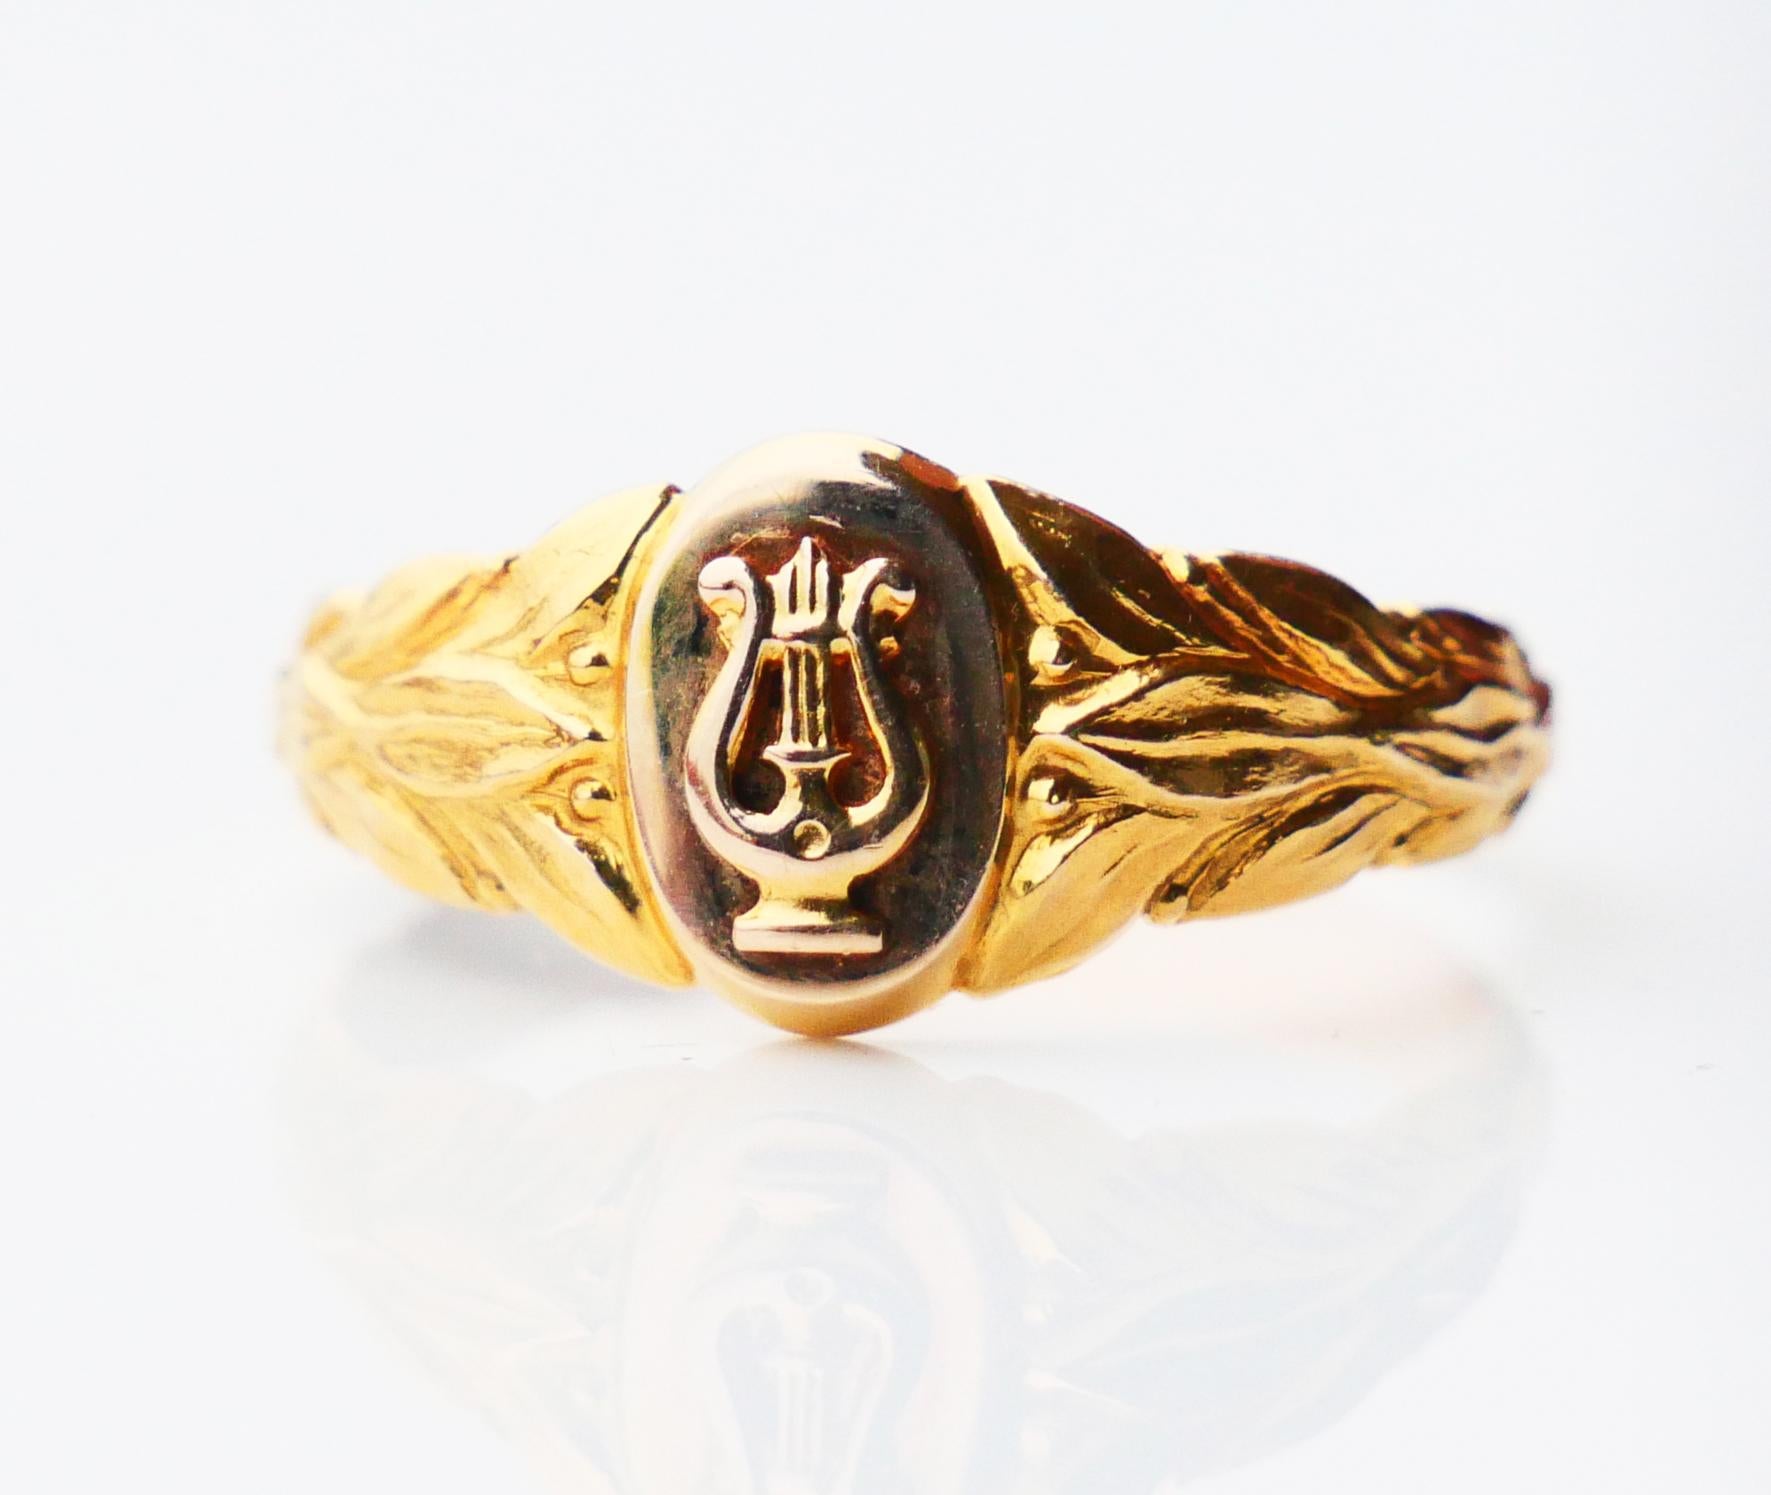 Signet Ring in solid 14K Yellow Gold with ₤yra - a symbol of all Musicians for centuries in Rose Gold. Continuous design of detailed Laurel leaves on the band and the shoulders. Crown part with the symbol is 10 mm x 6 mm x 3mm deep.

Unisex model.